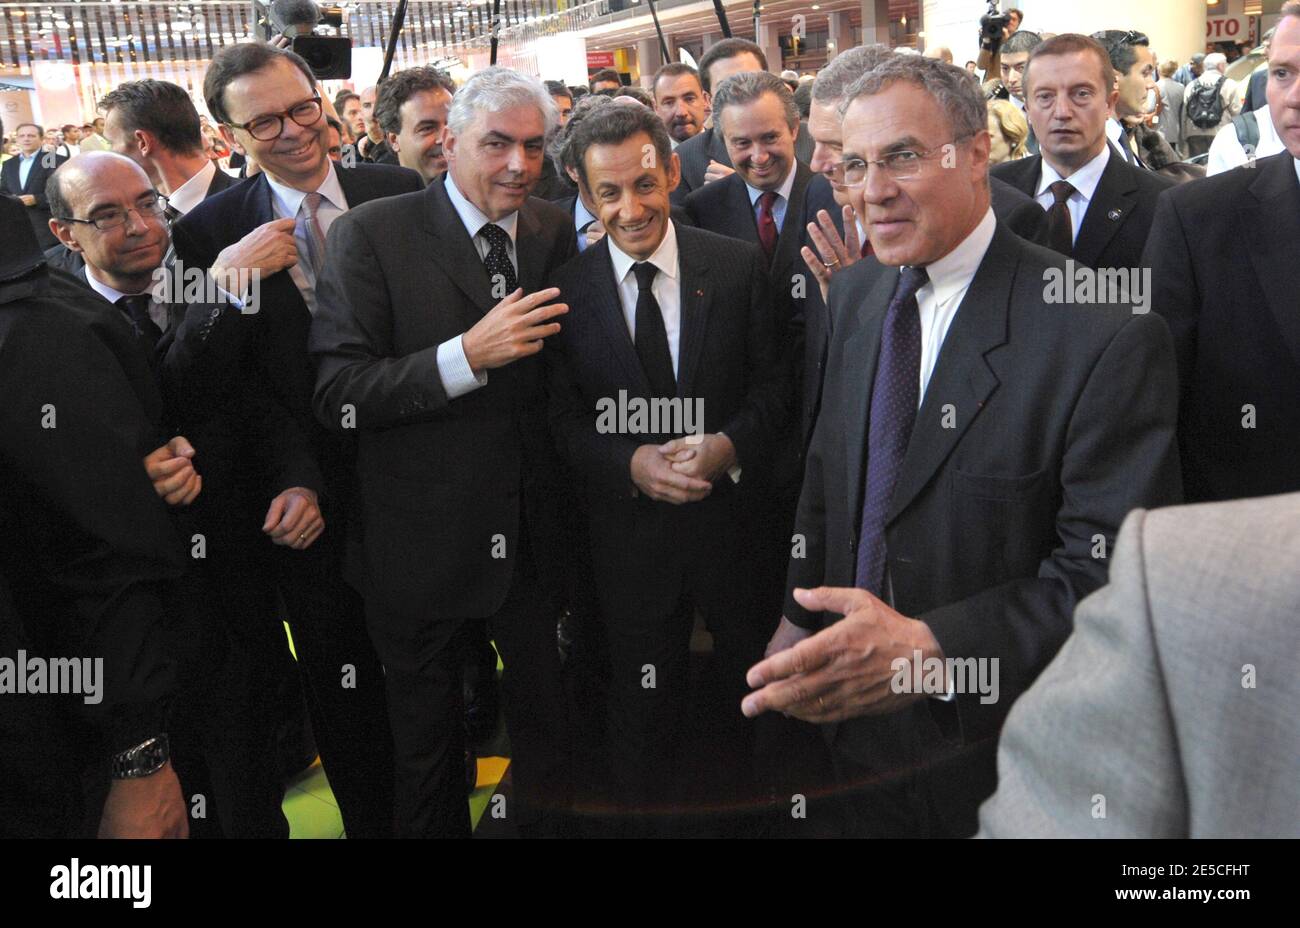 Nicolas Sarkozy, Jean-Philippe Collin and former Renault CEO Louis Schweitzer visit the Paris International Motor Show, in Paris, France, on October 9, 2008. Photo by Giancarlo Gorassini/ABACAPRESS.COM Stock Photo